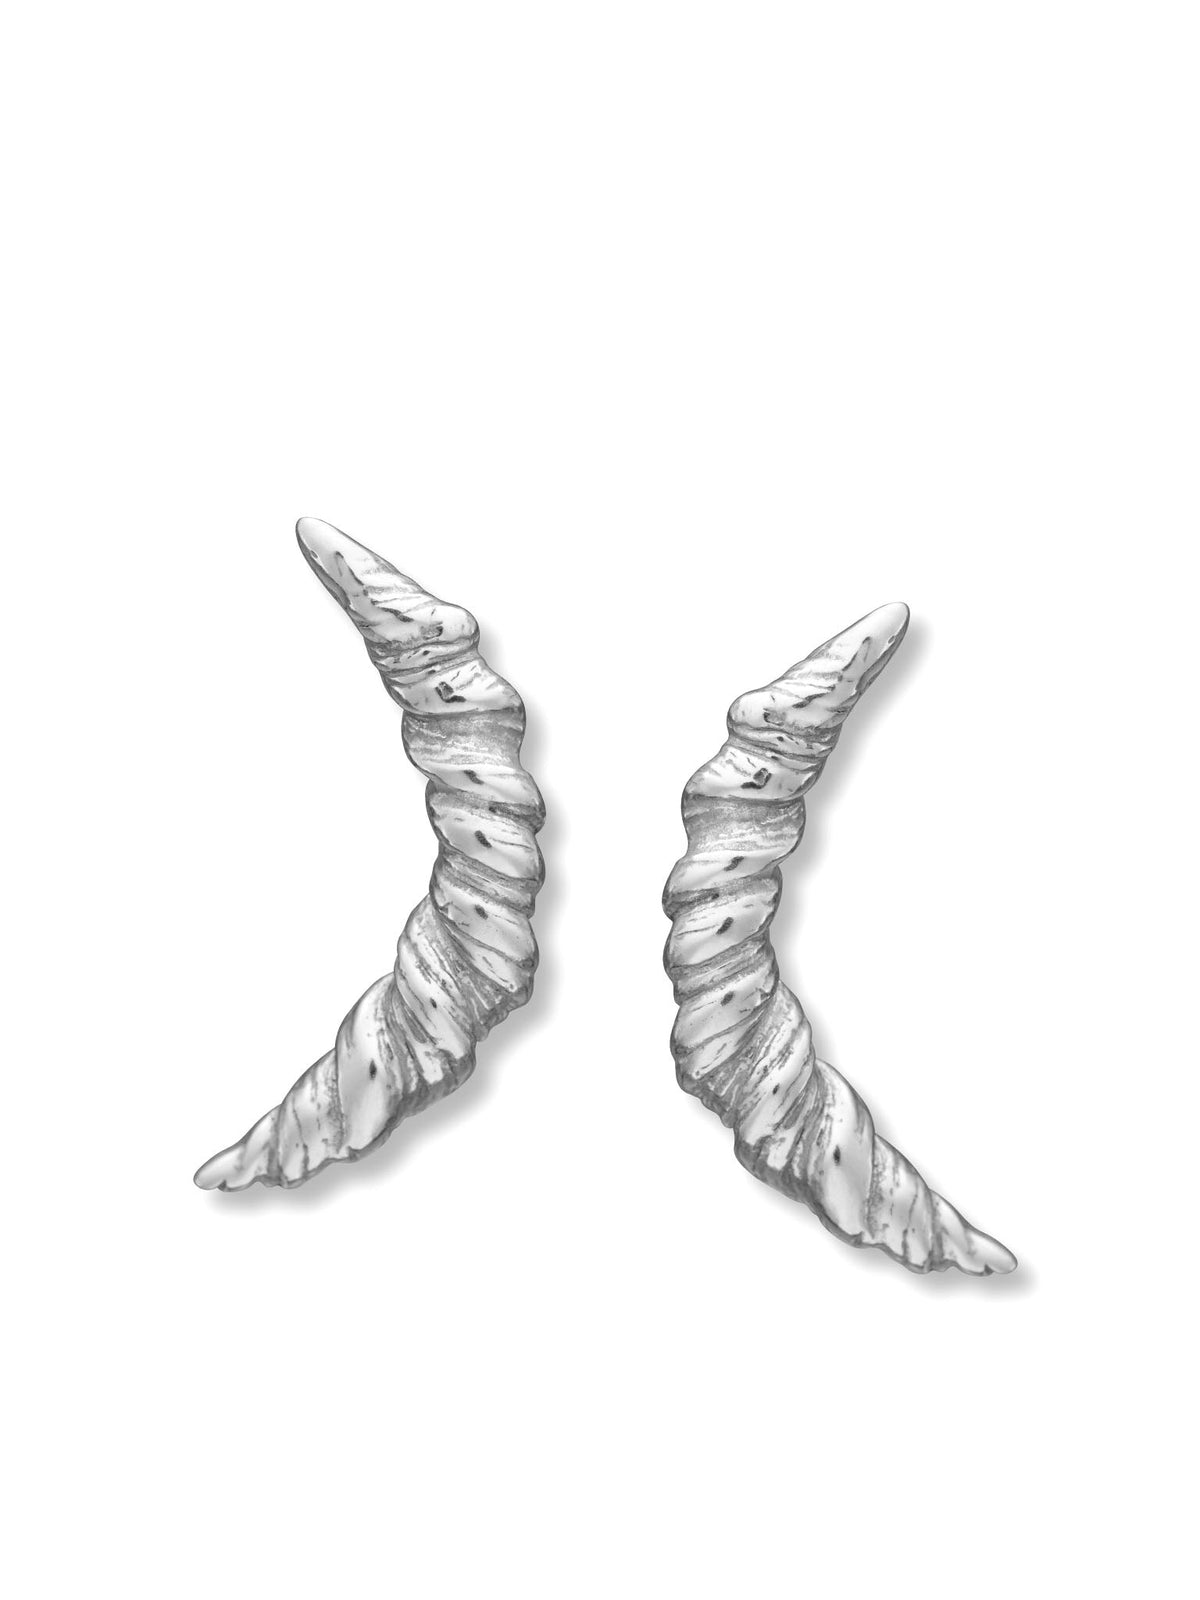 Nautilus Twisted Earrings Silver